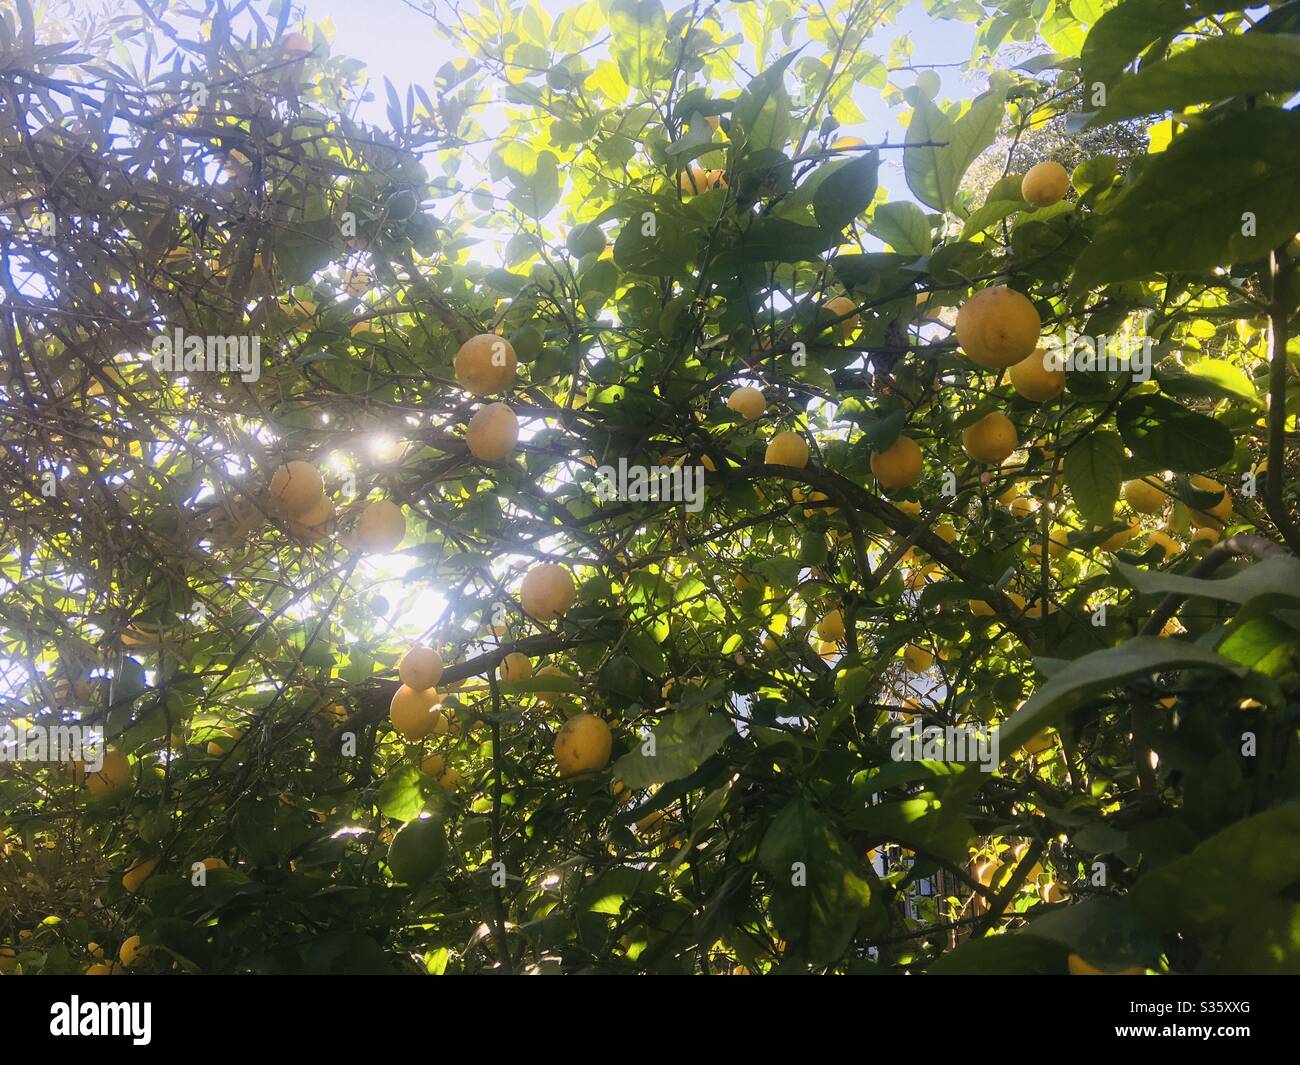 View from underneath a lovely lemon tree on a hot sunny day with the sun breaking through from between the branches Stock Photo